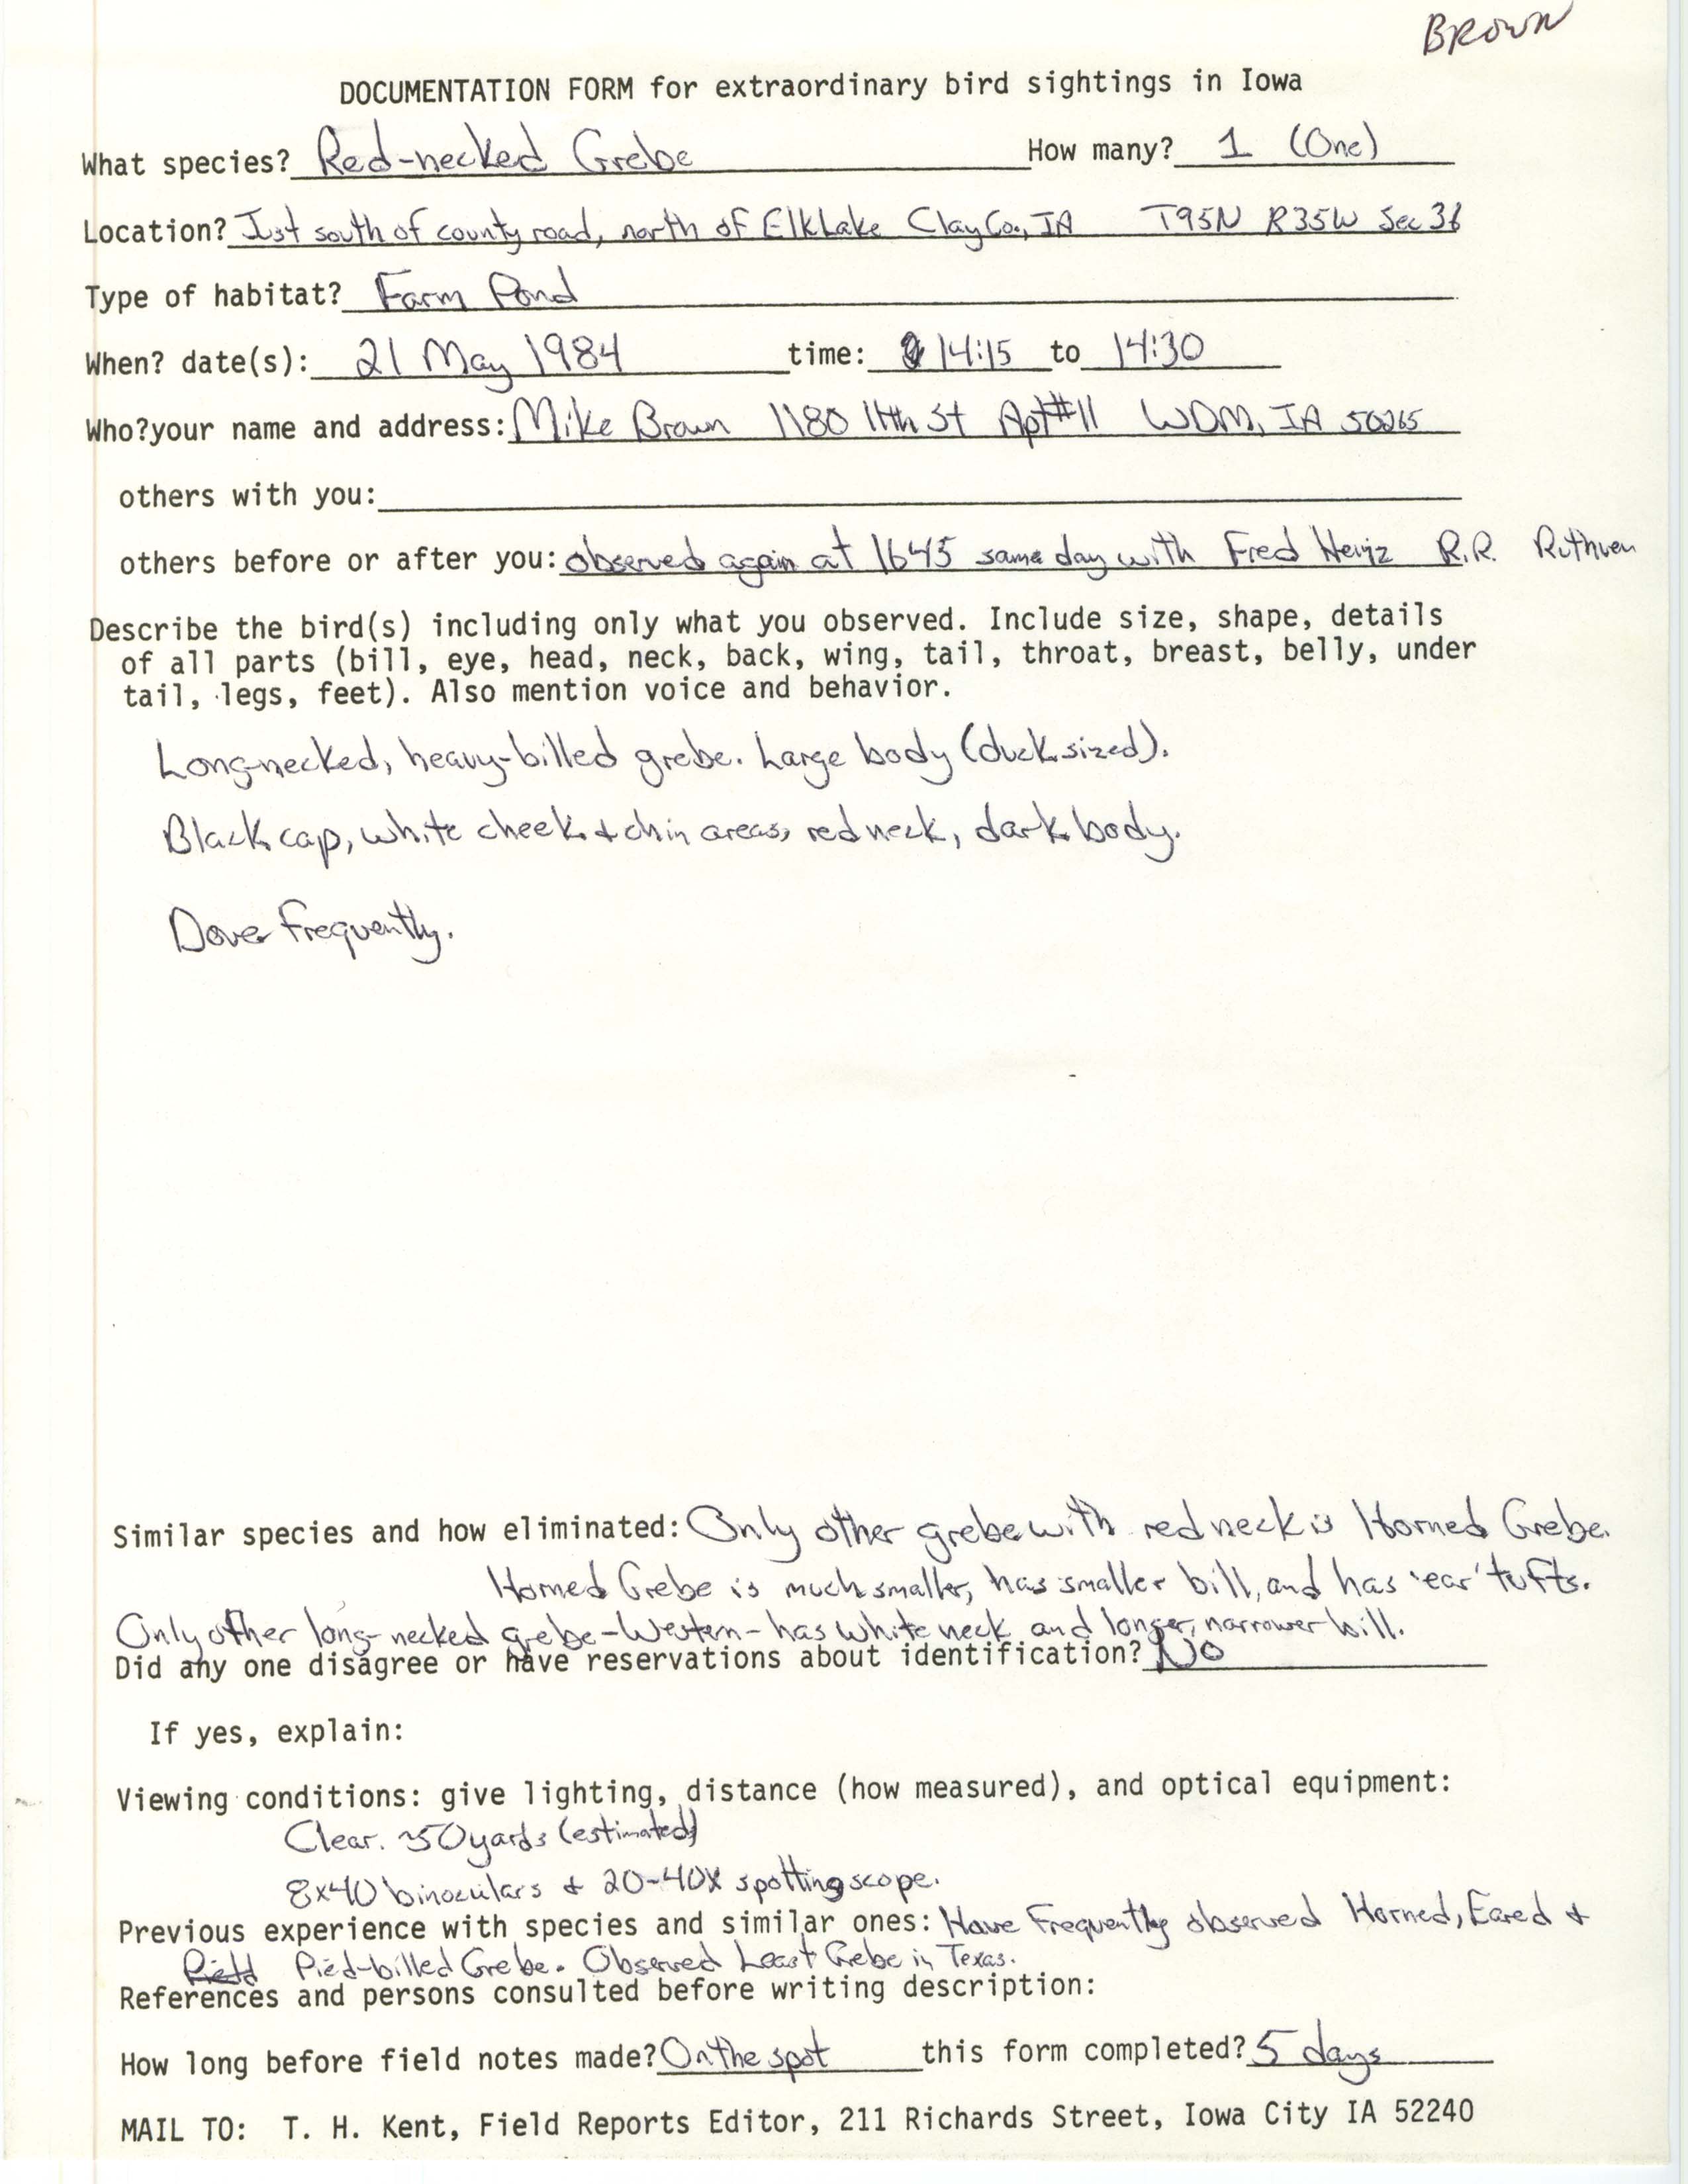 Rare bird documentation form for Red-necked Grebe at Elk Lake, 1984